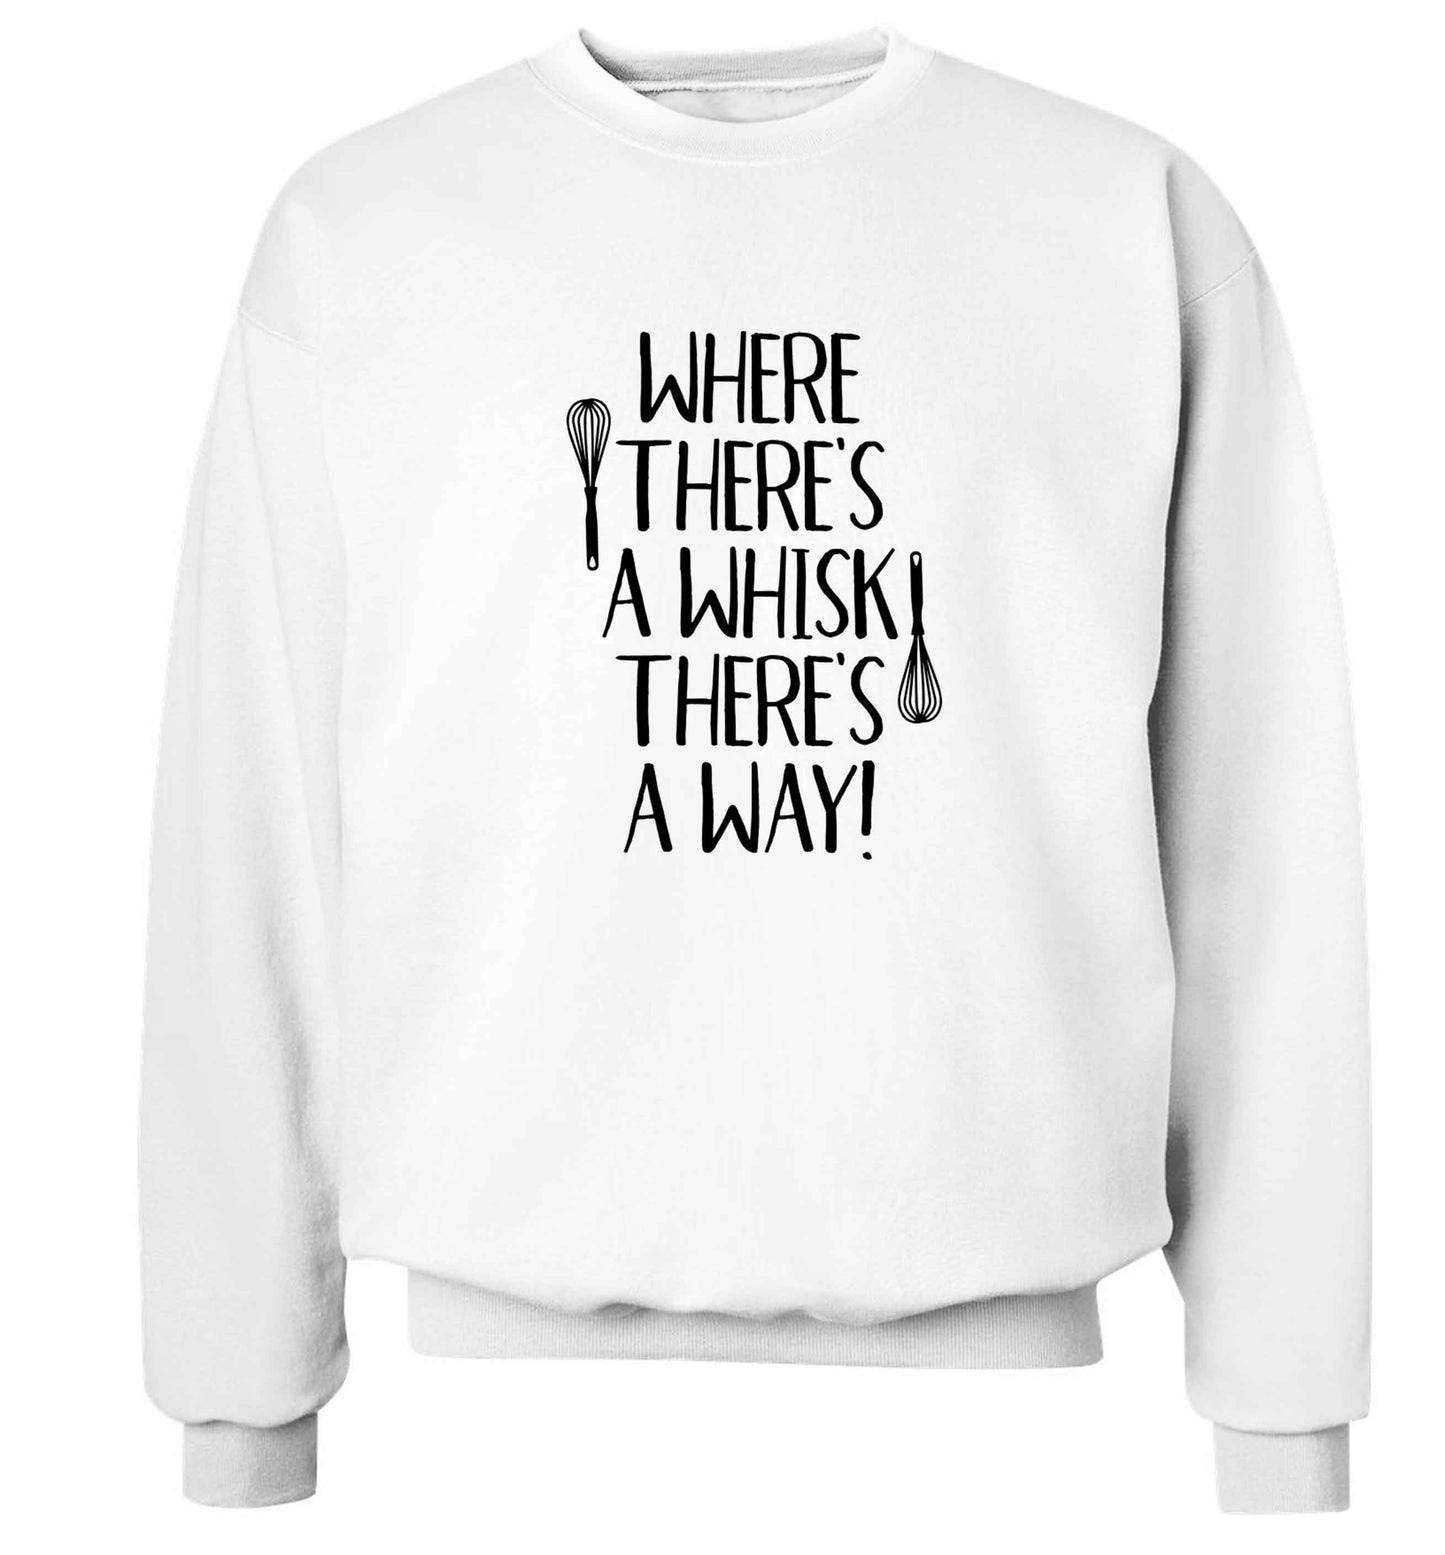 Where there's a whisk there's a way Adult's unisex white Sweater 2XL